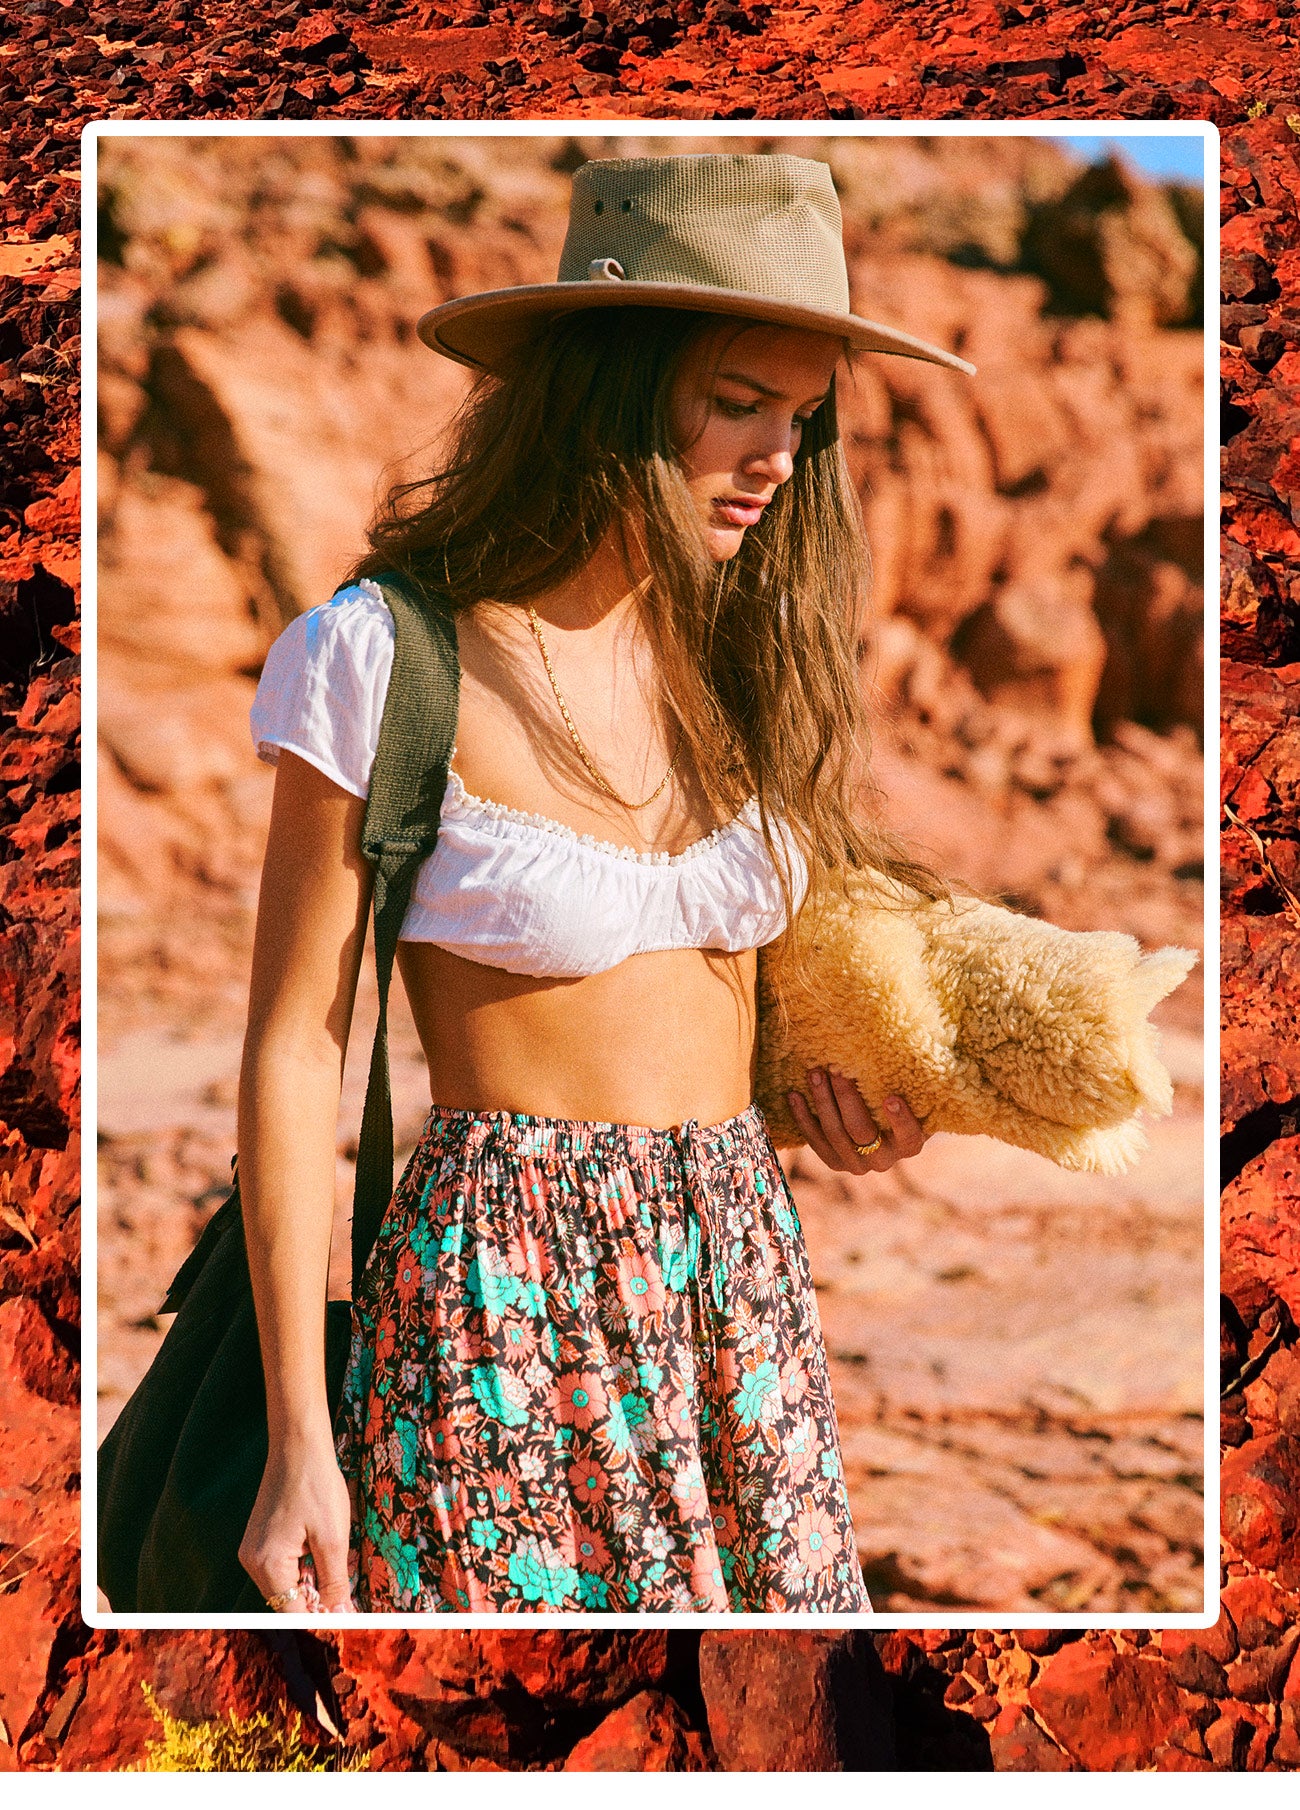 Forget Me Not the new sustainable fashion collection from Arnhem was shot at Cape Leveque, WA